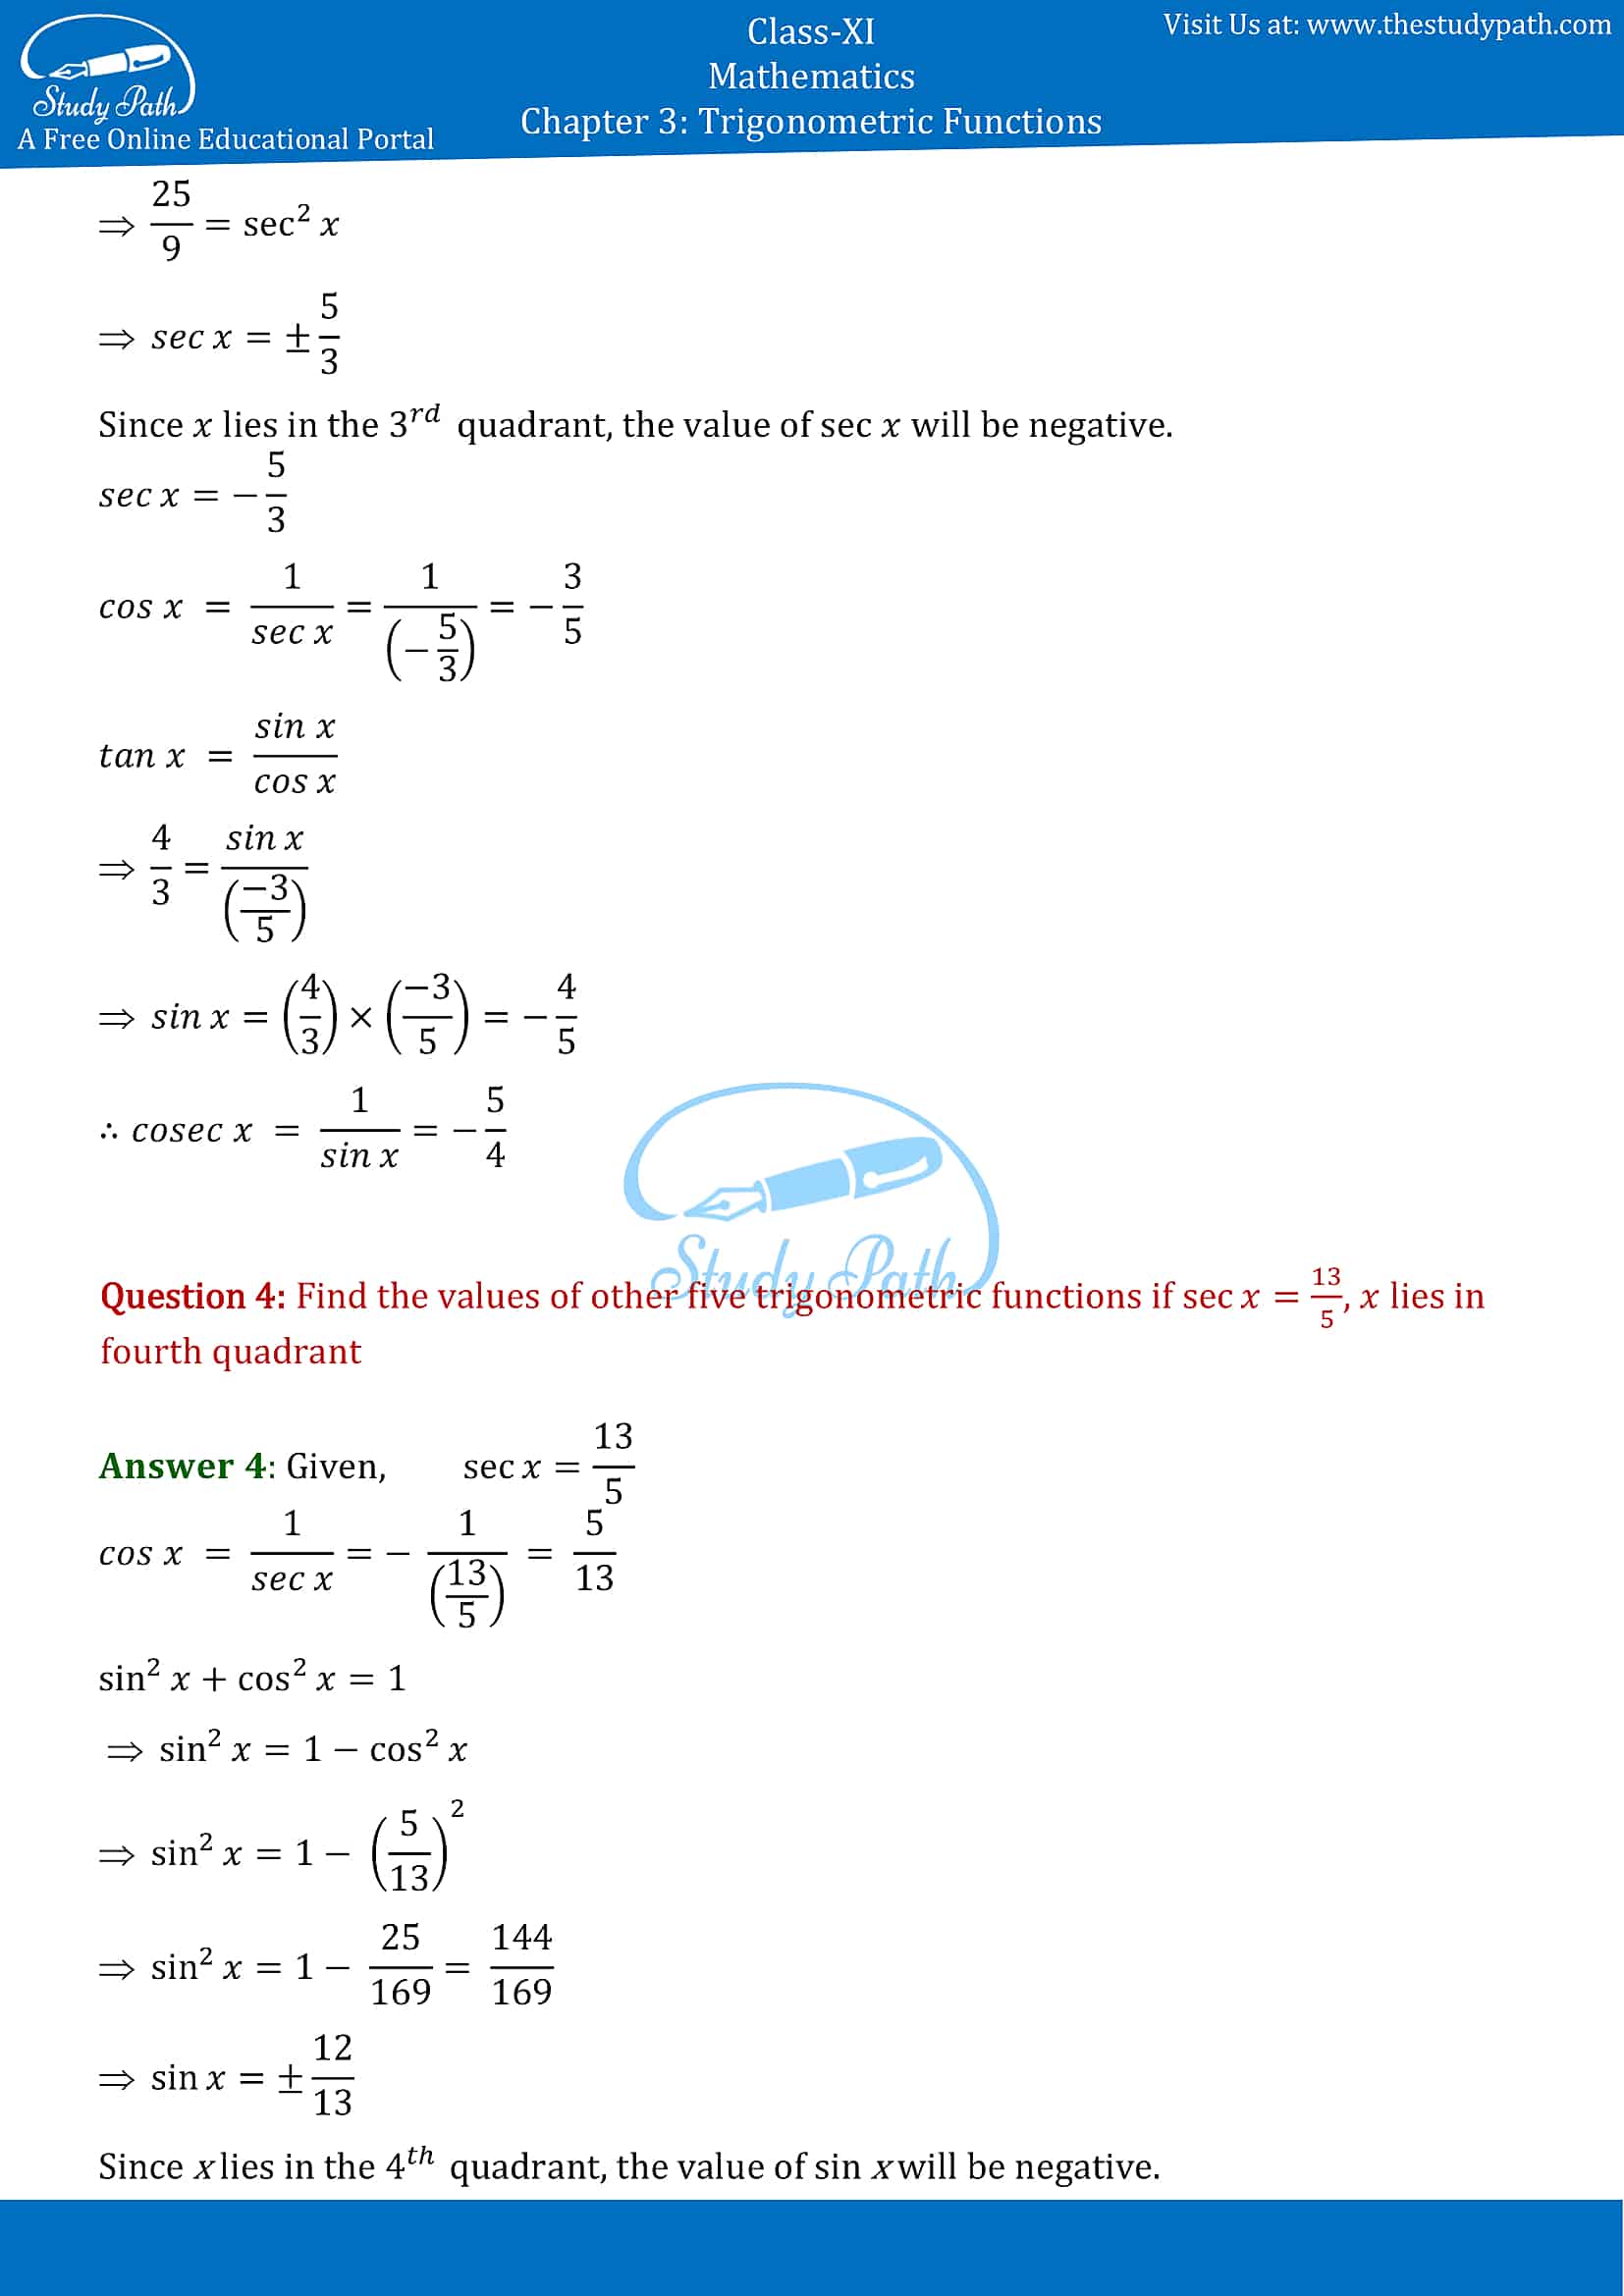 NCERT Solutions for Class 11 Maths Chapter 3 Trigonometric Functions Exercise 3.2